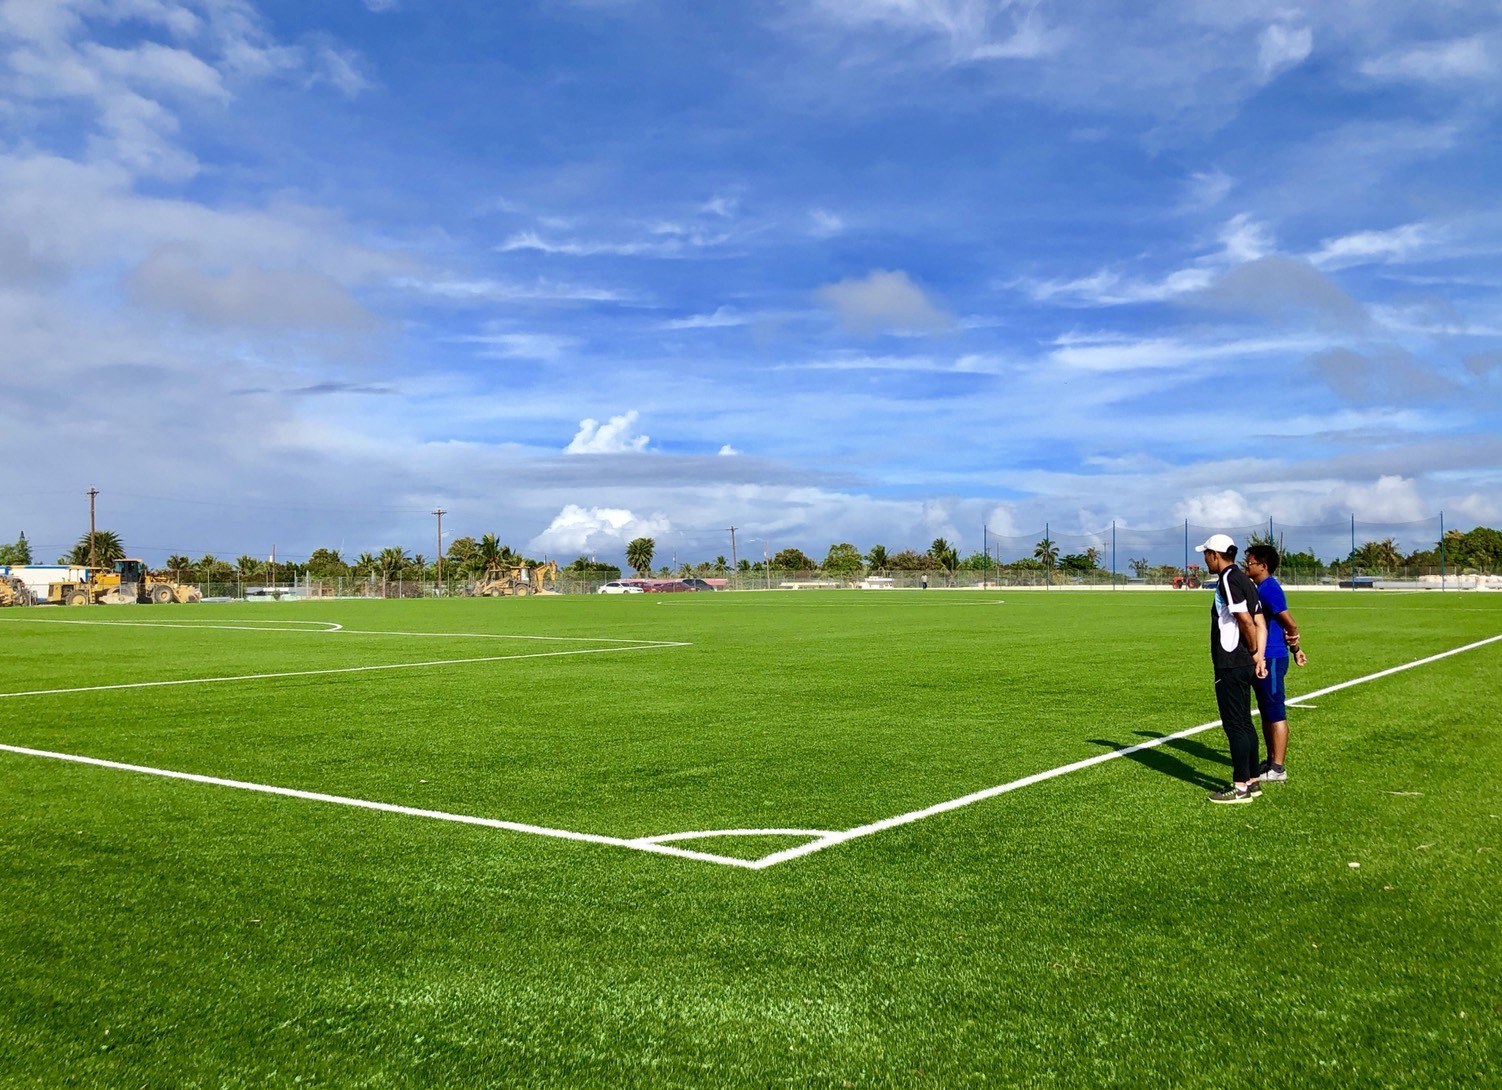 Why artificial grass works